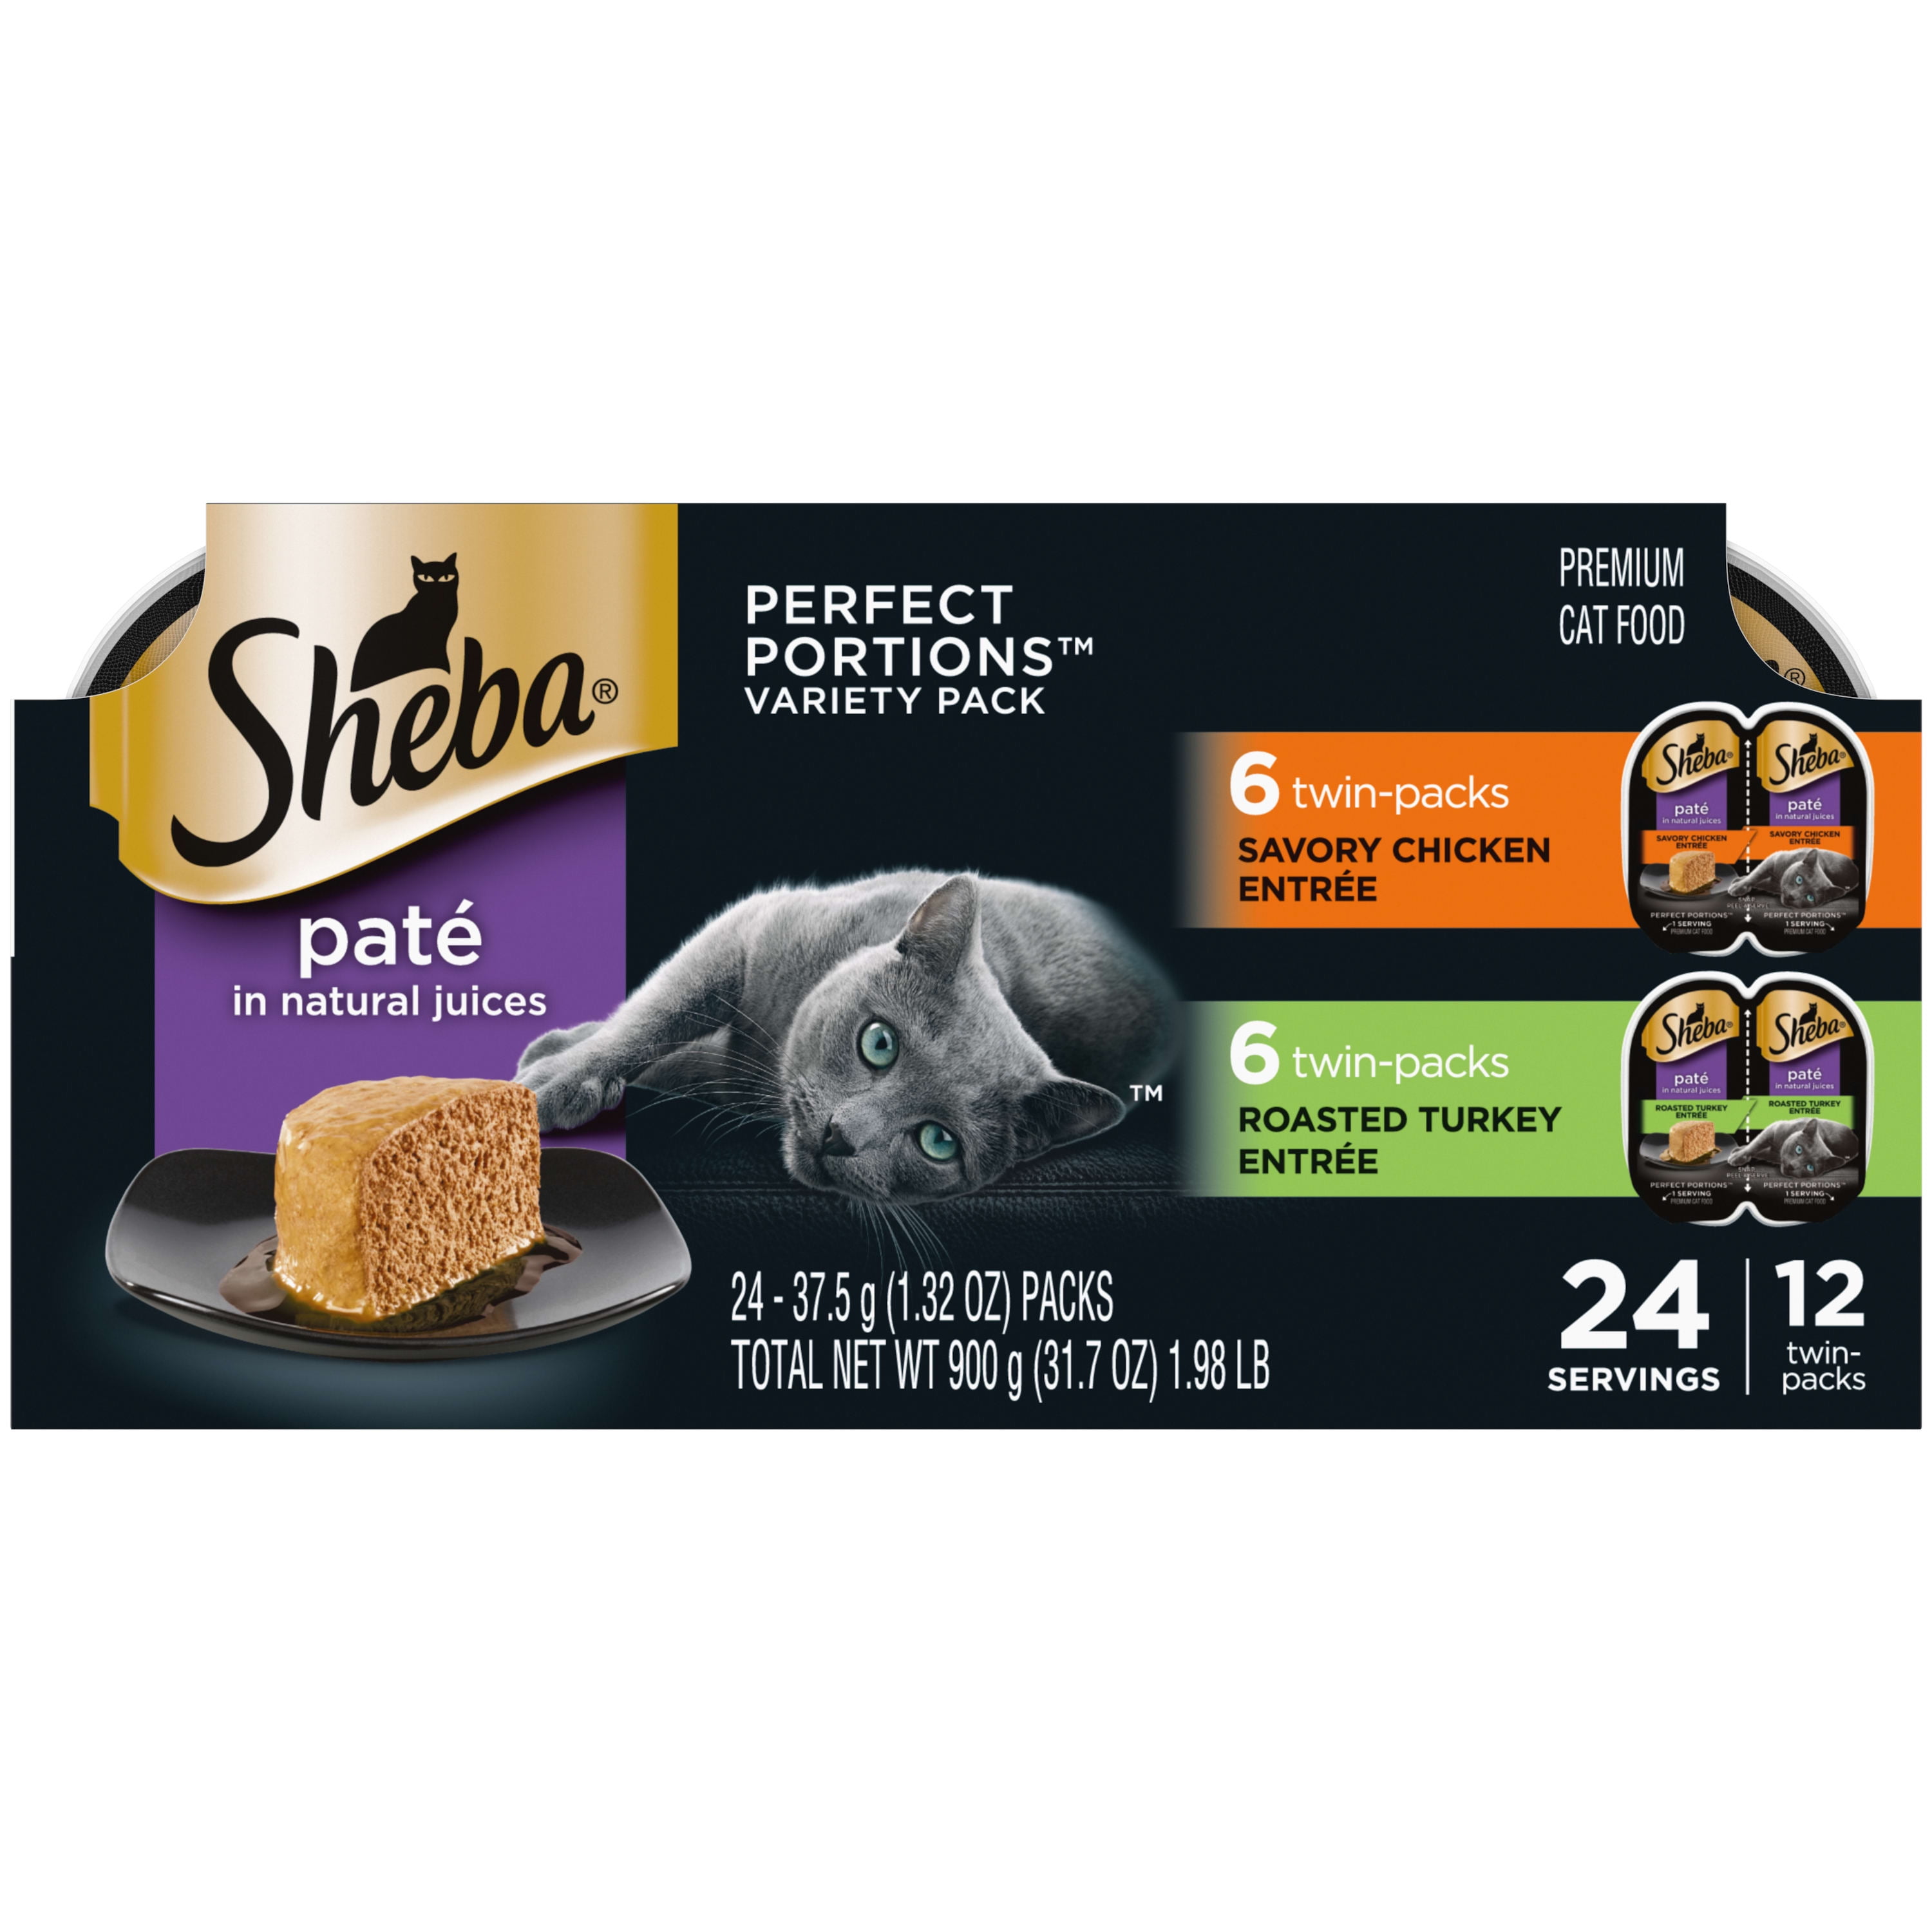 Plons Ontmoedigd zijn Banzai SHEBA Wet Cat Food Pate Variety Pack, Savory Chicken and Roasted Turkey  Entrees, 2.6 oz. PERFECT PORTIONS Twin Pack Trays - Walmart.com